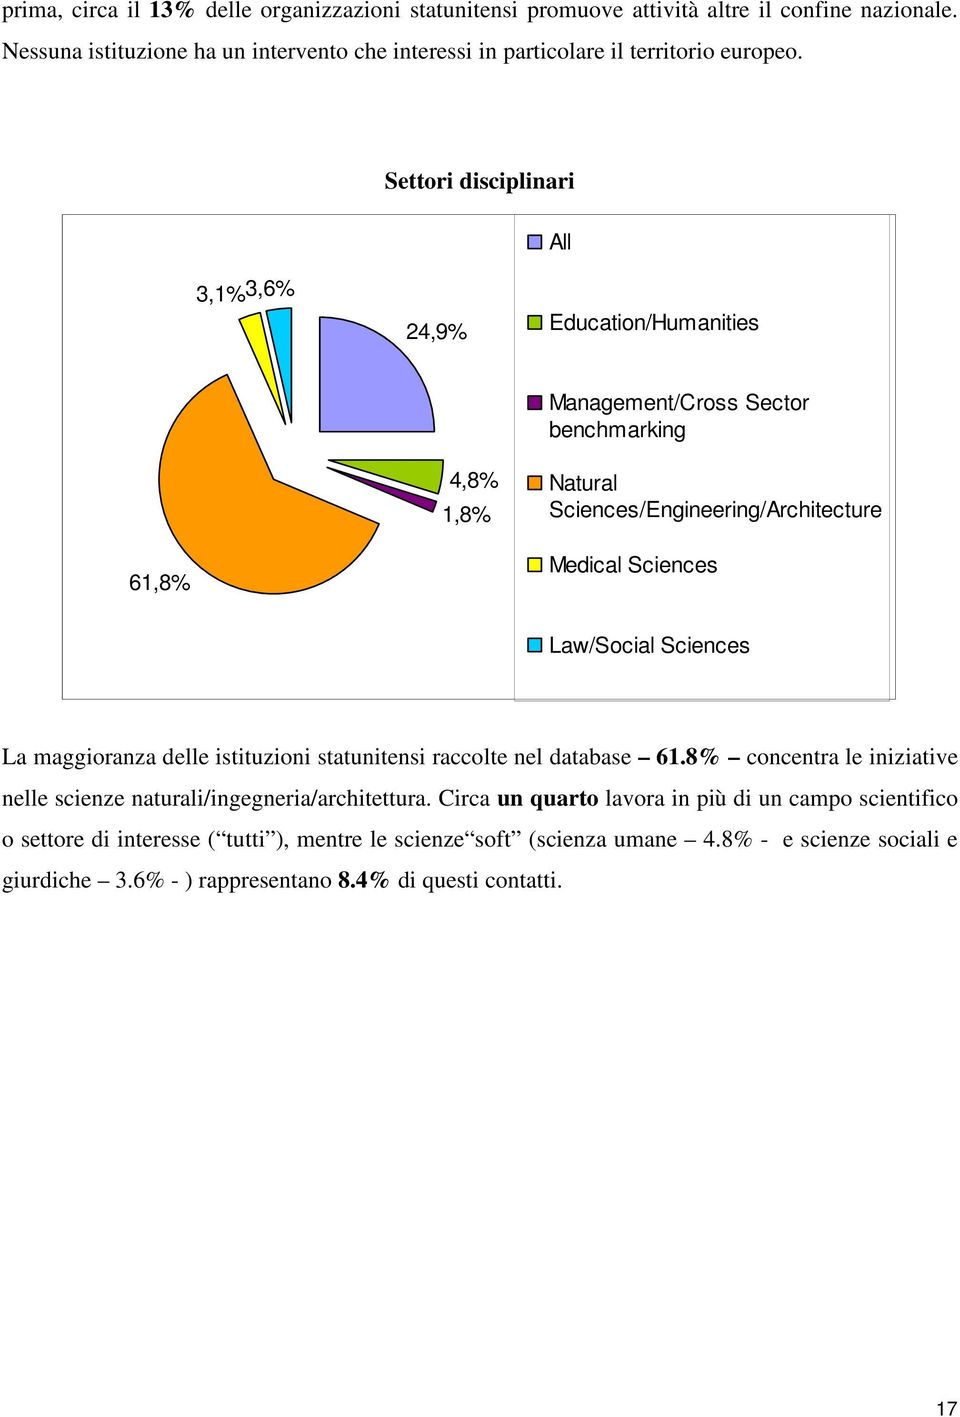 Settori disciplinari All 3,1% 3,6% 24,9% Education/Humanities 4,8% 1,8% Management/Cross Sector benchmarking Natural Sciences/Engineering/Architecture 61,8% Medical Sciences Law/Social